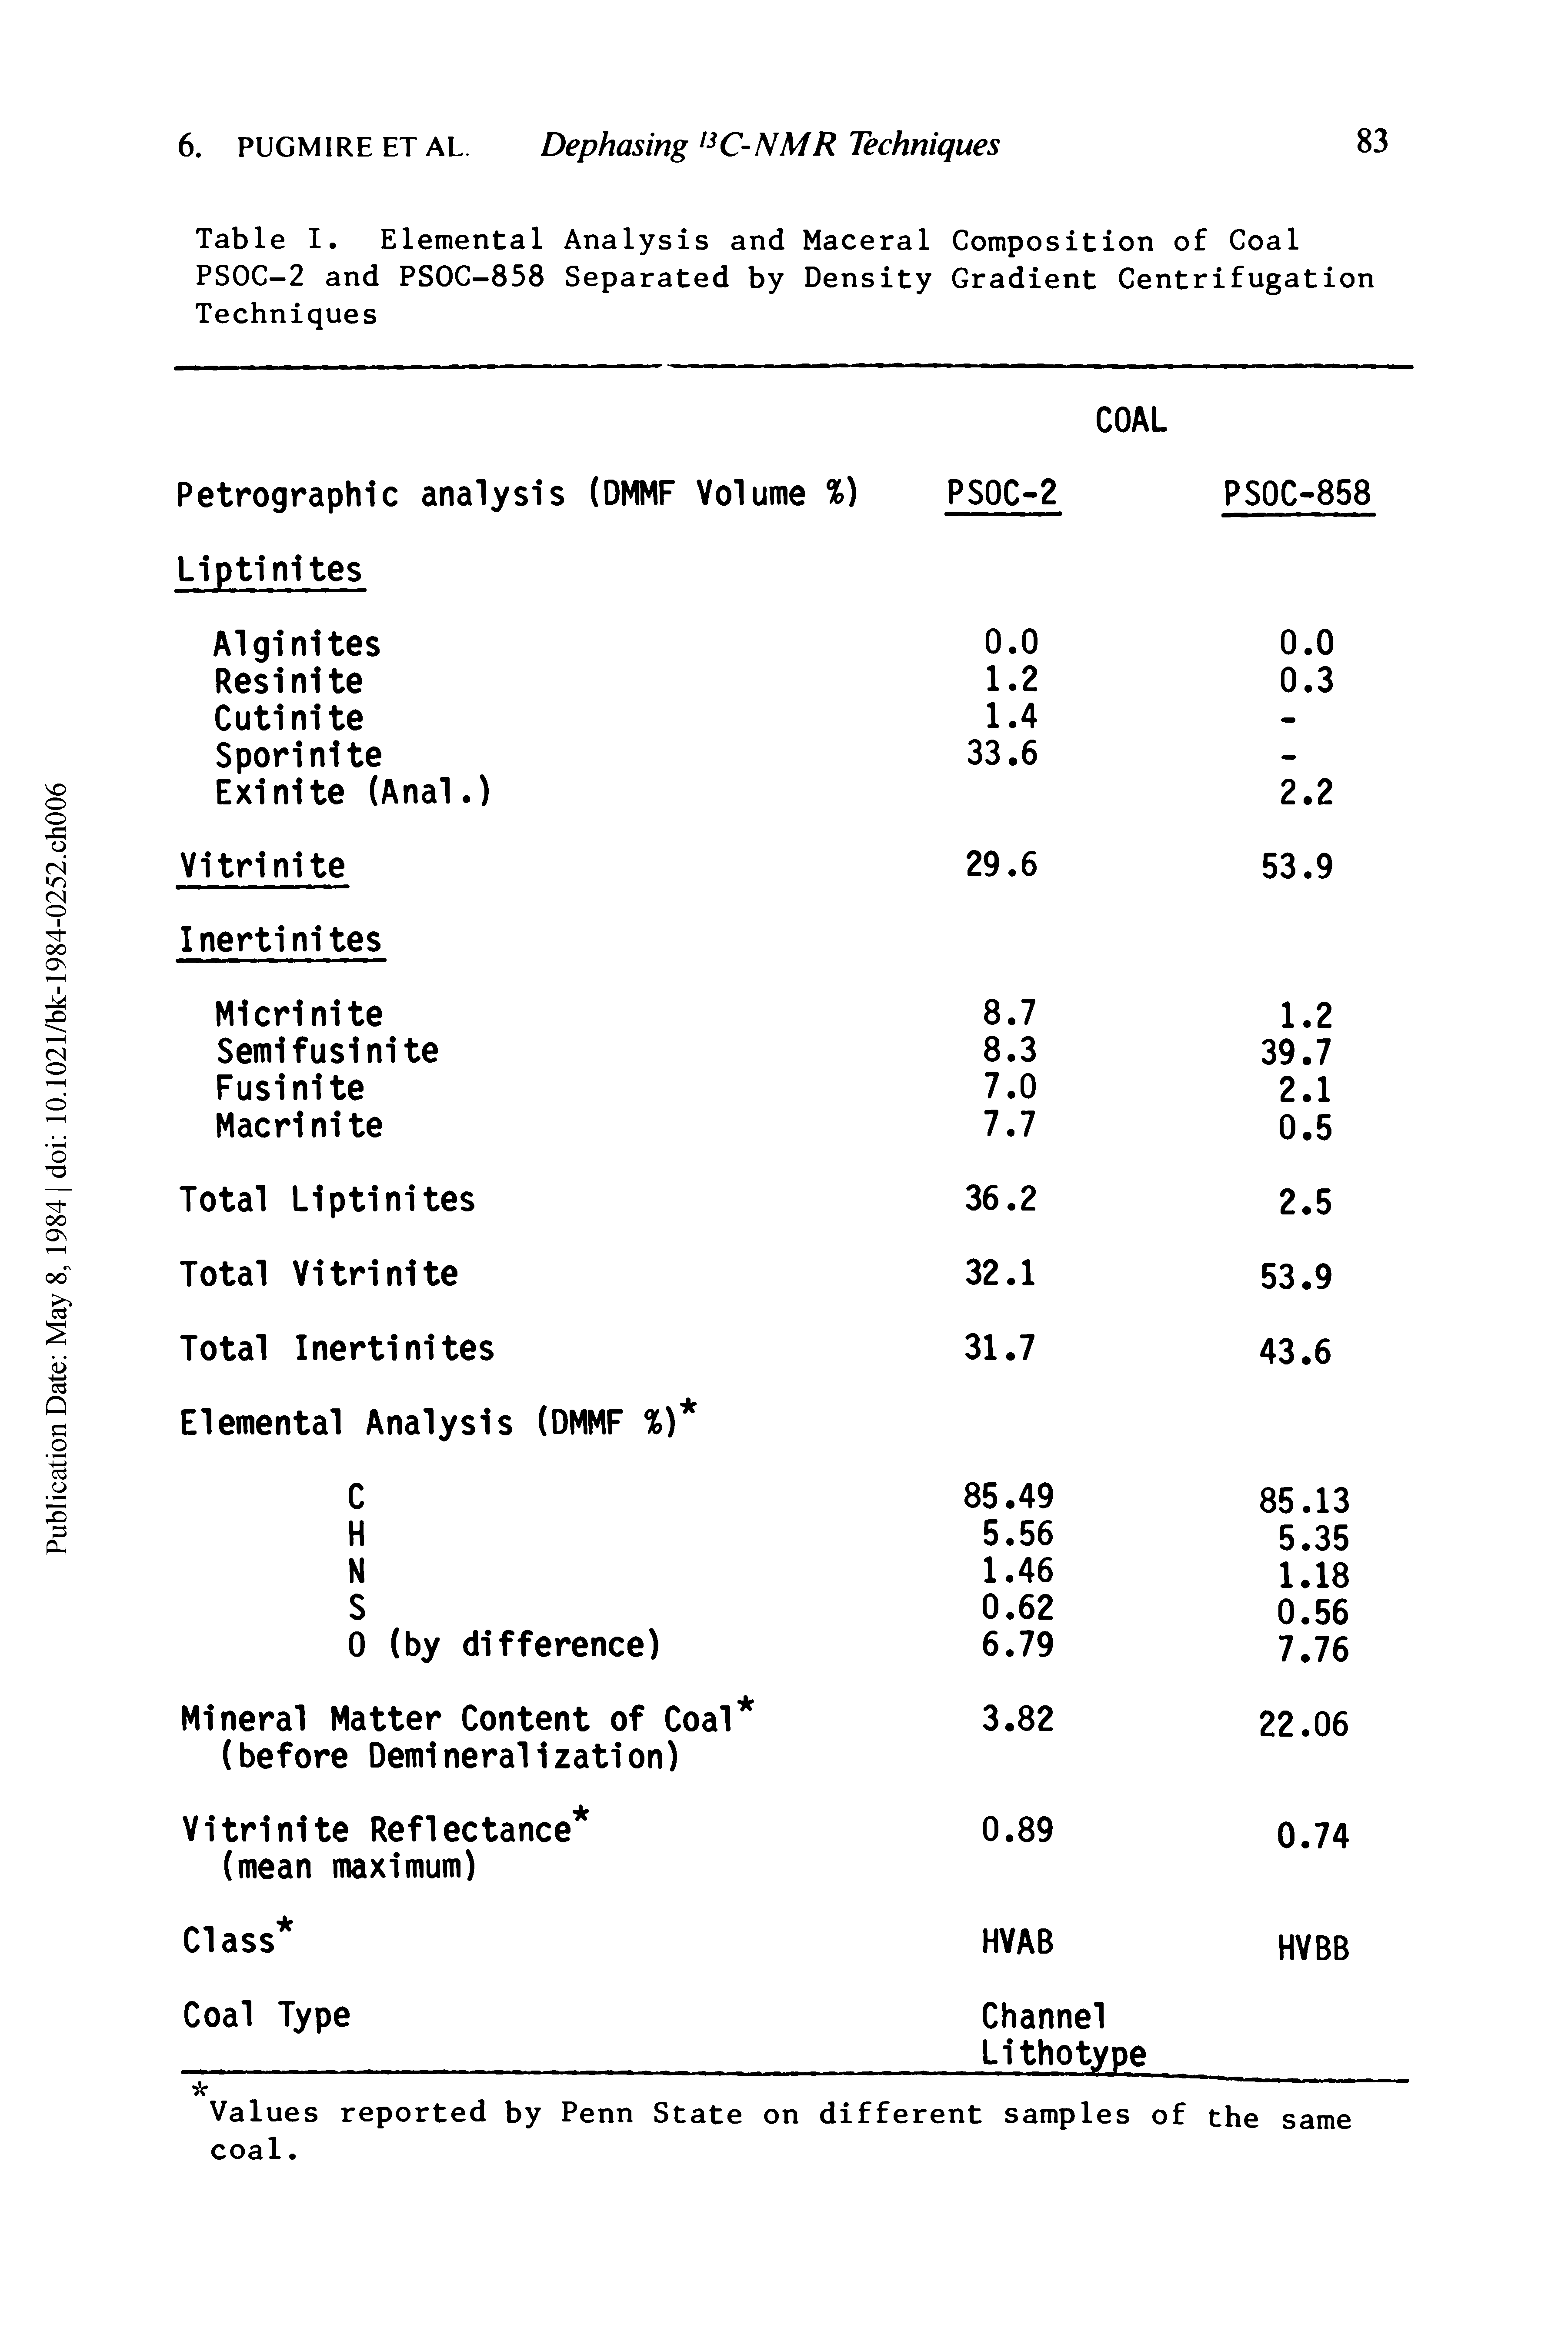 Table I. Elemental Analysis and Maceral Composition of Coal PSOC-2 and PSOC-858 Separated by Density Gradient Centrifugation Techniques...